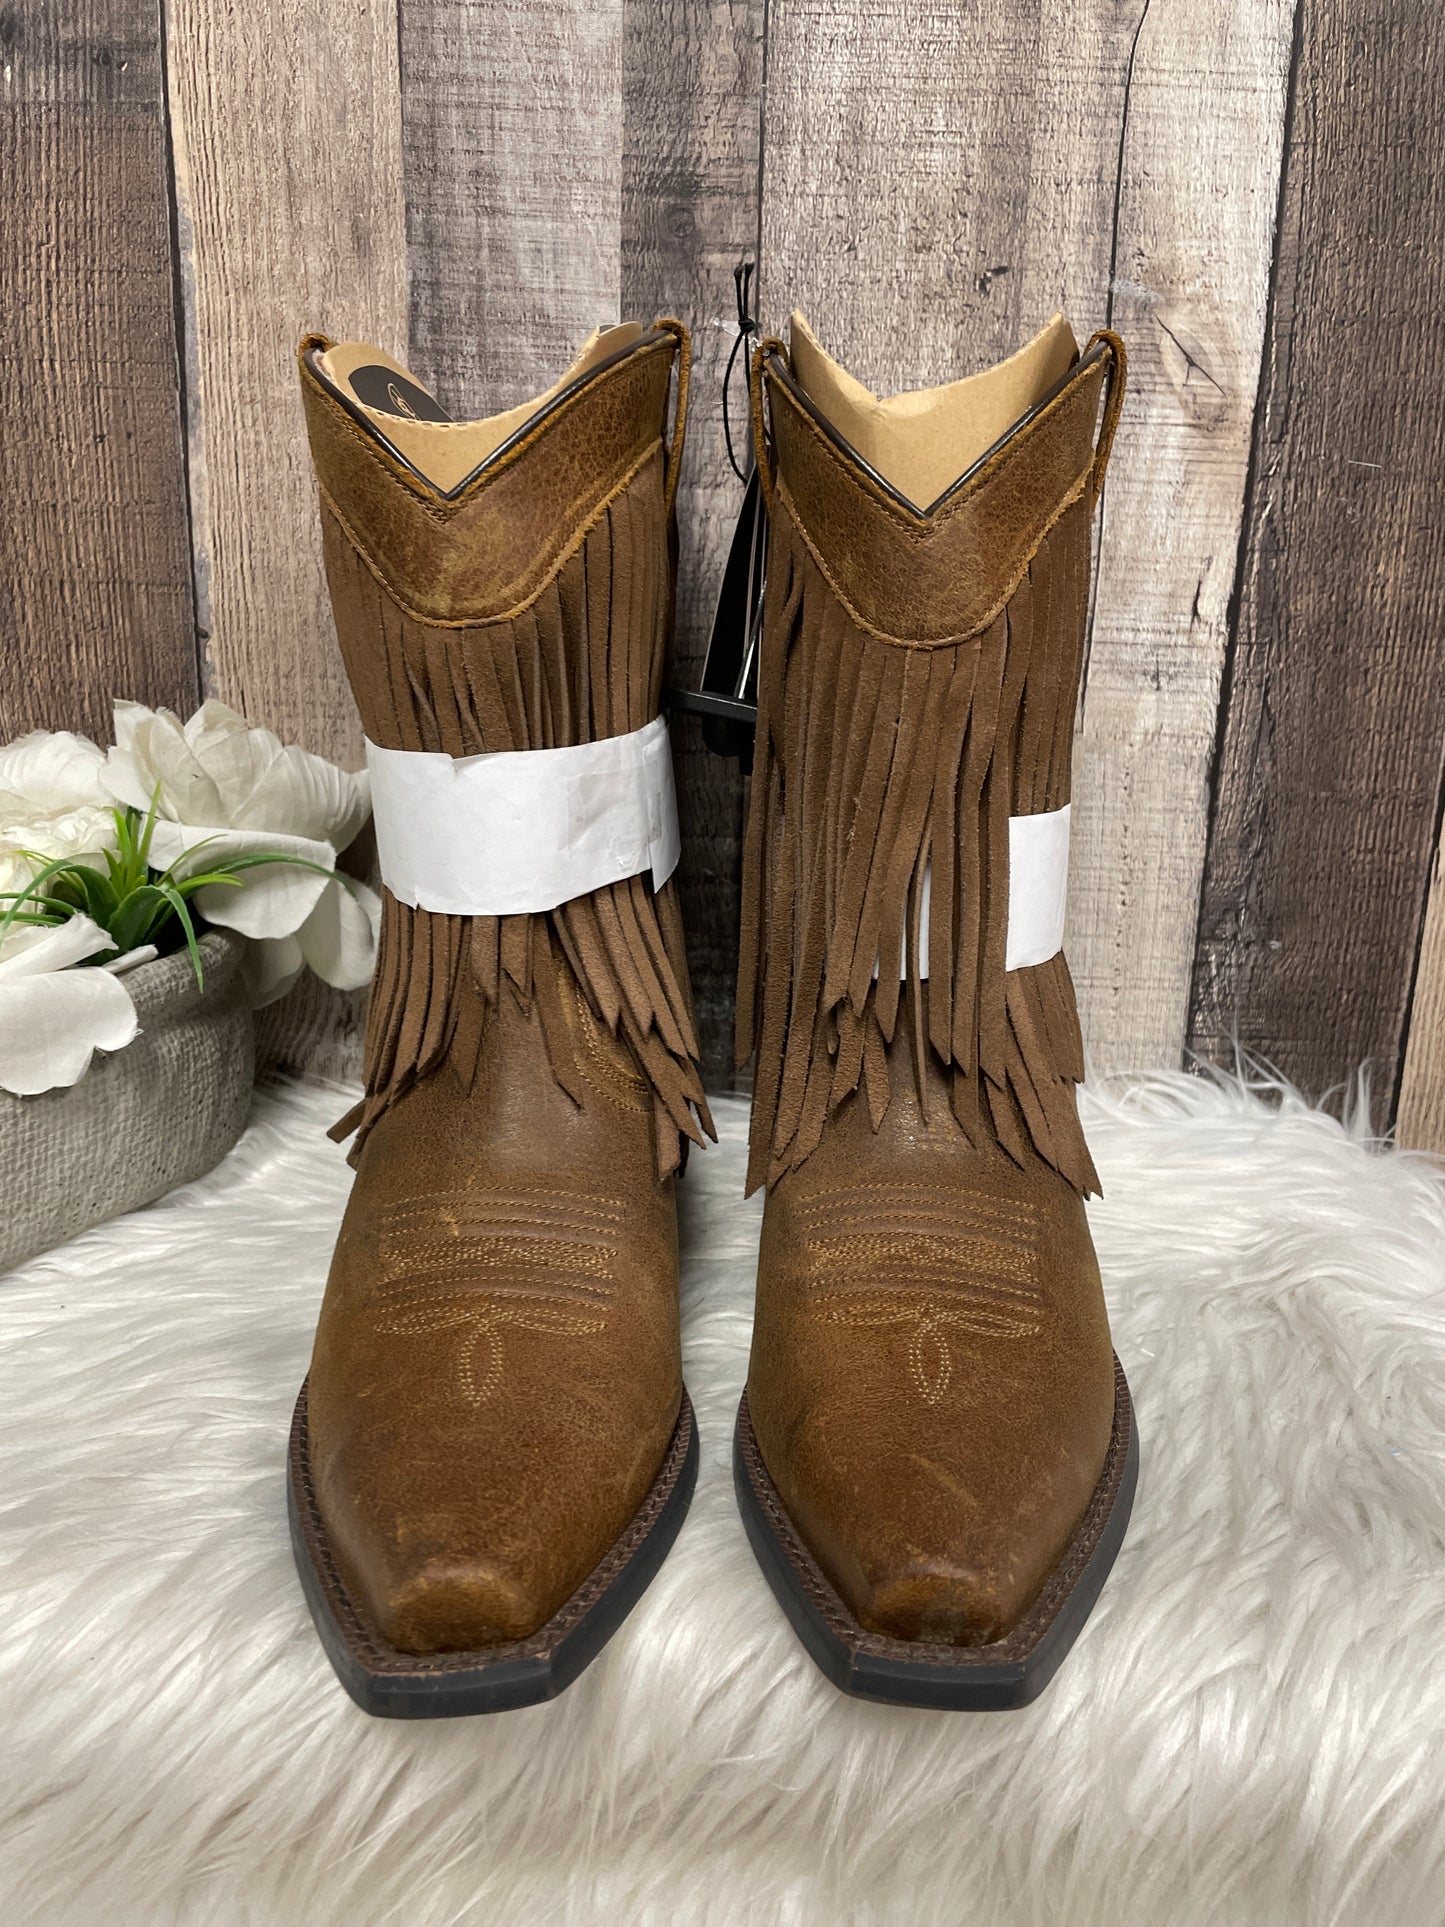 Boots Mid-calf Heels By Ariat  Size: 8.5